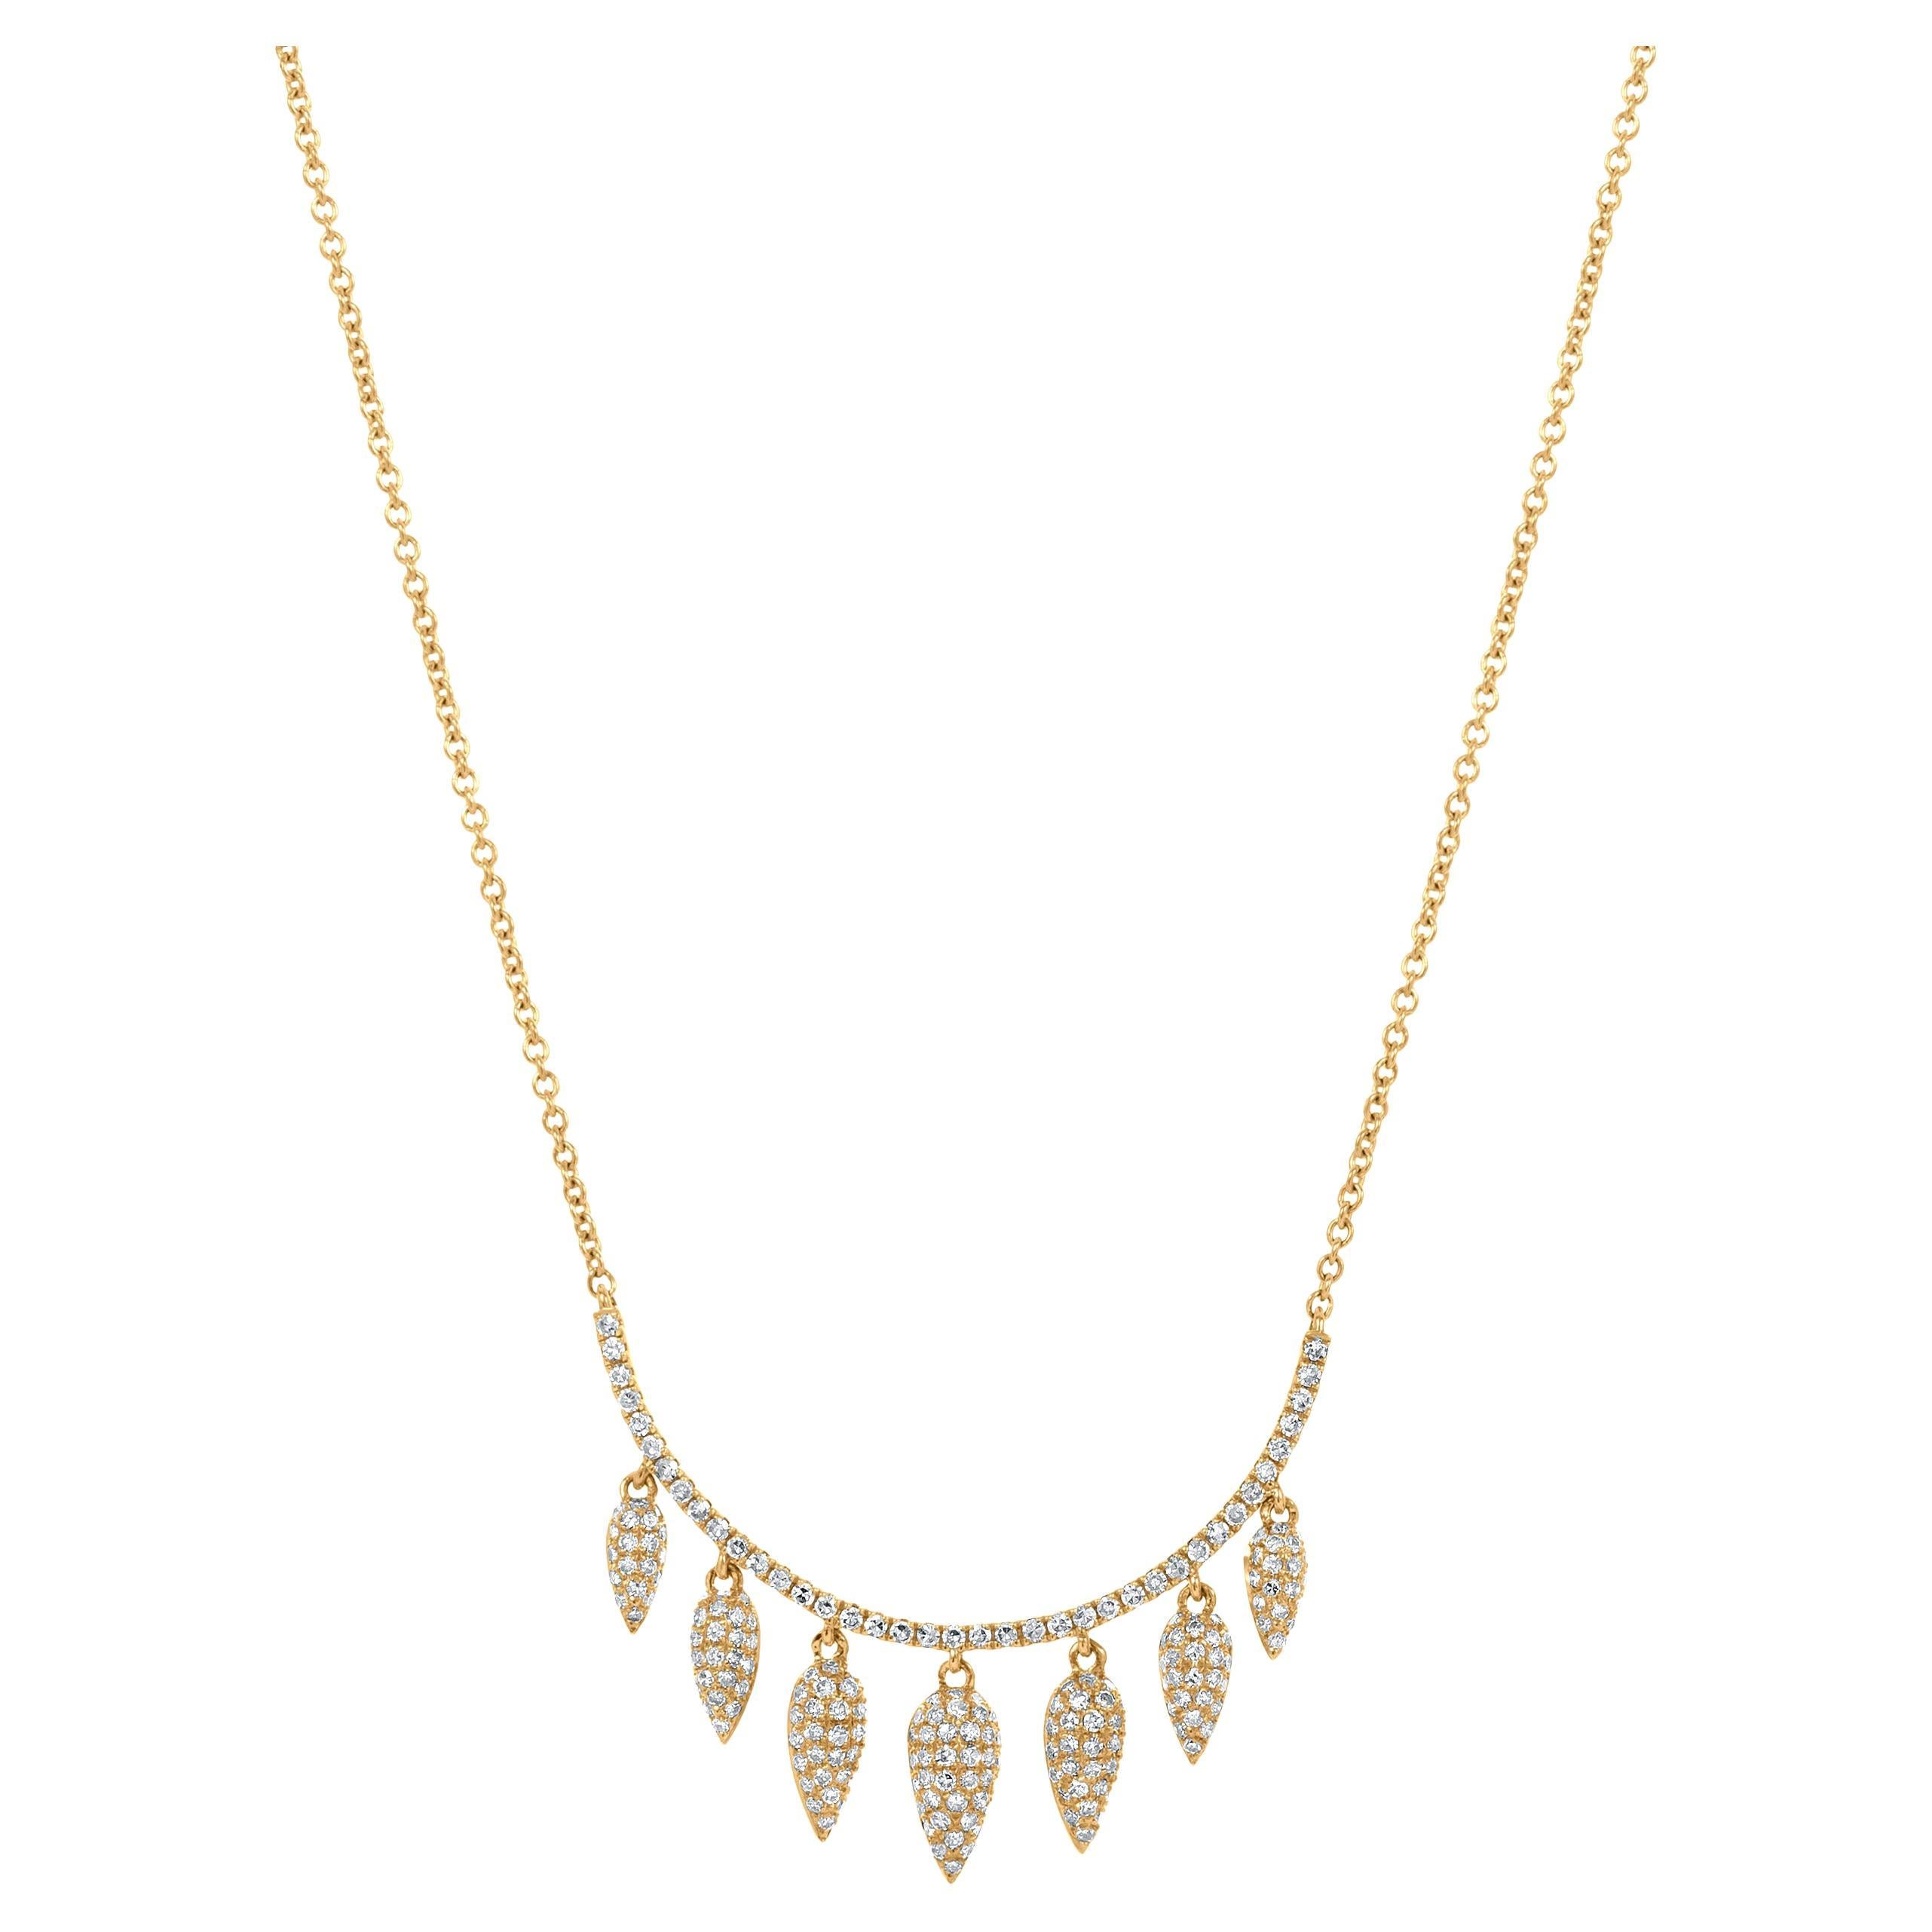 Luxle Leaf Dangle Diamond Necklace in 14K Yellow Gold 